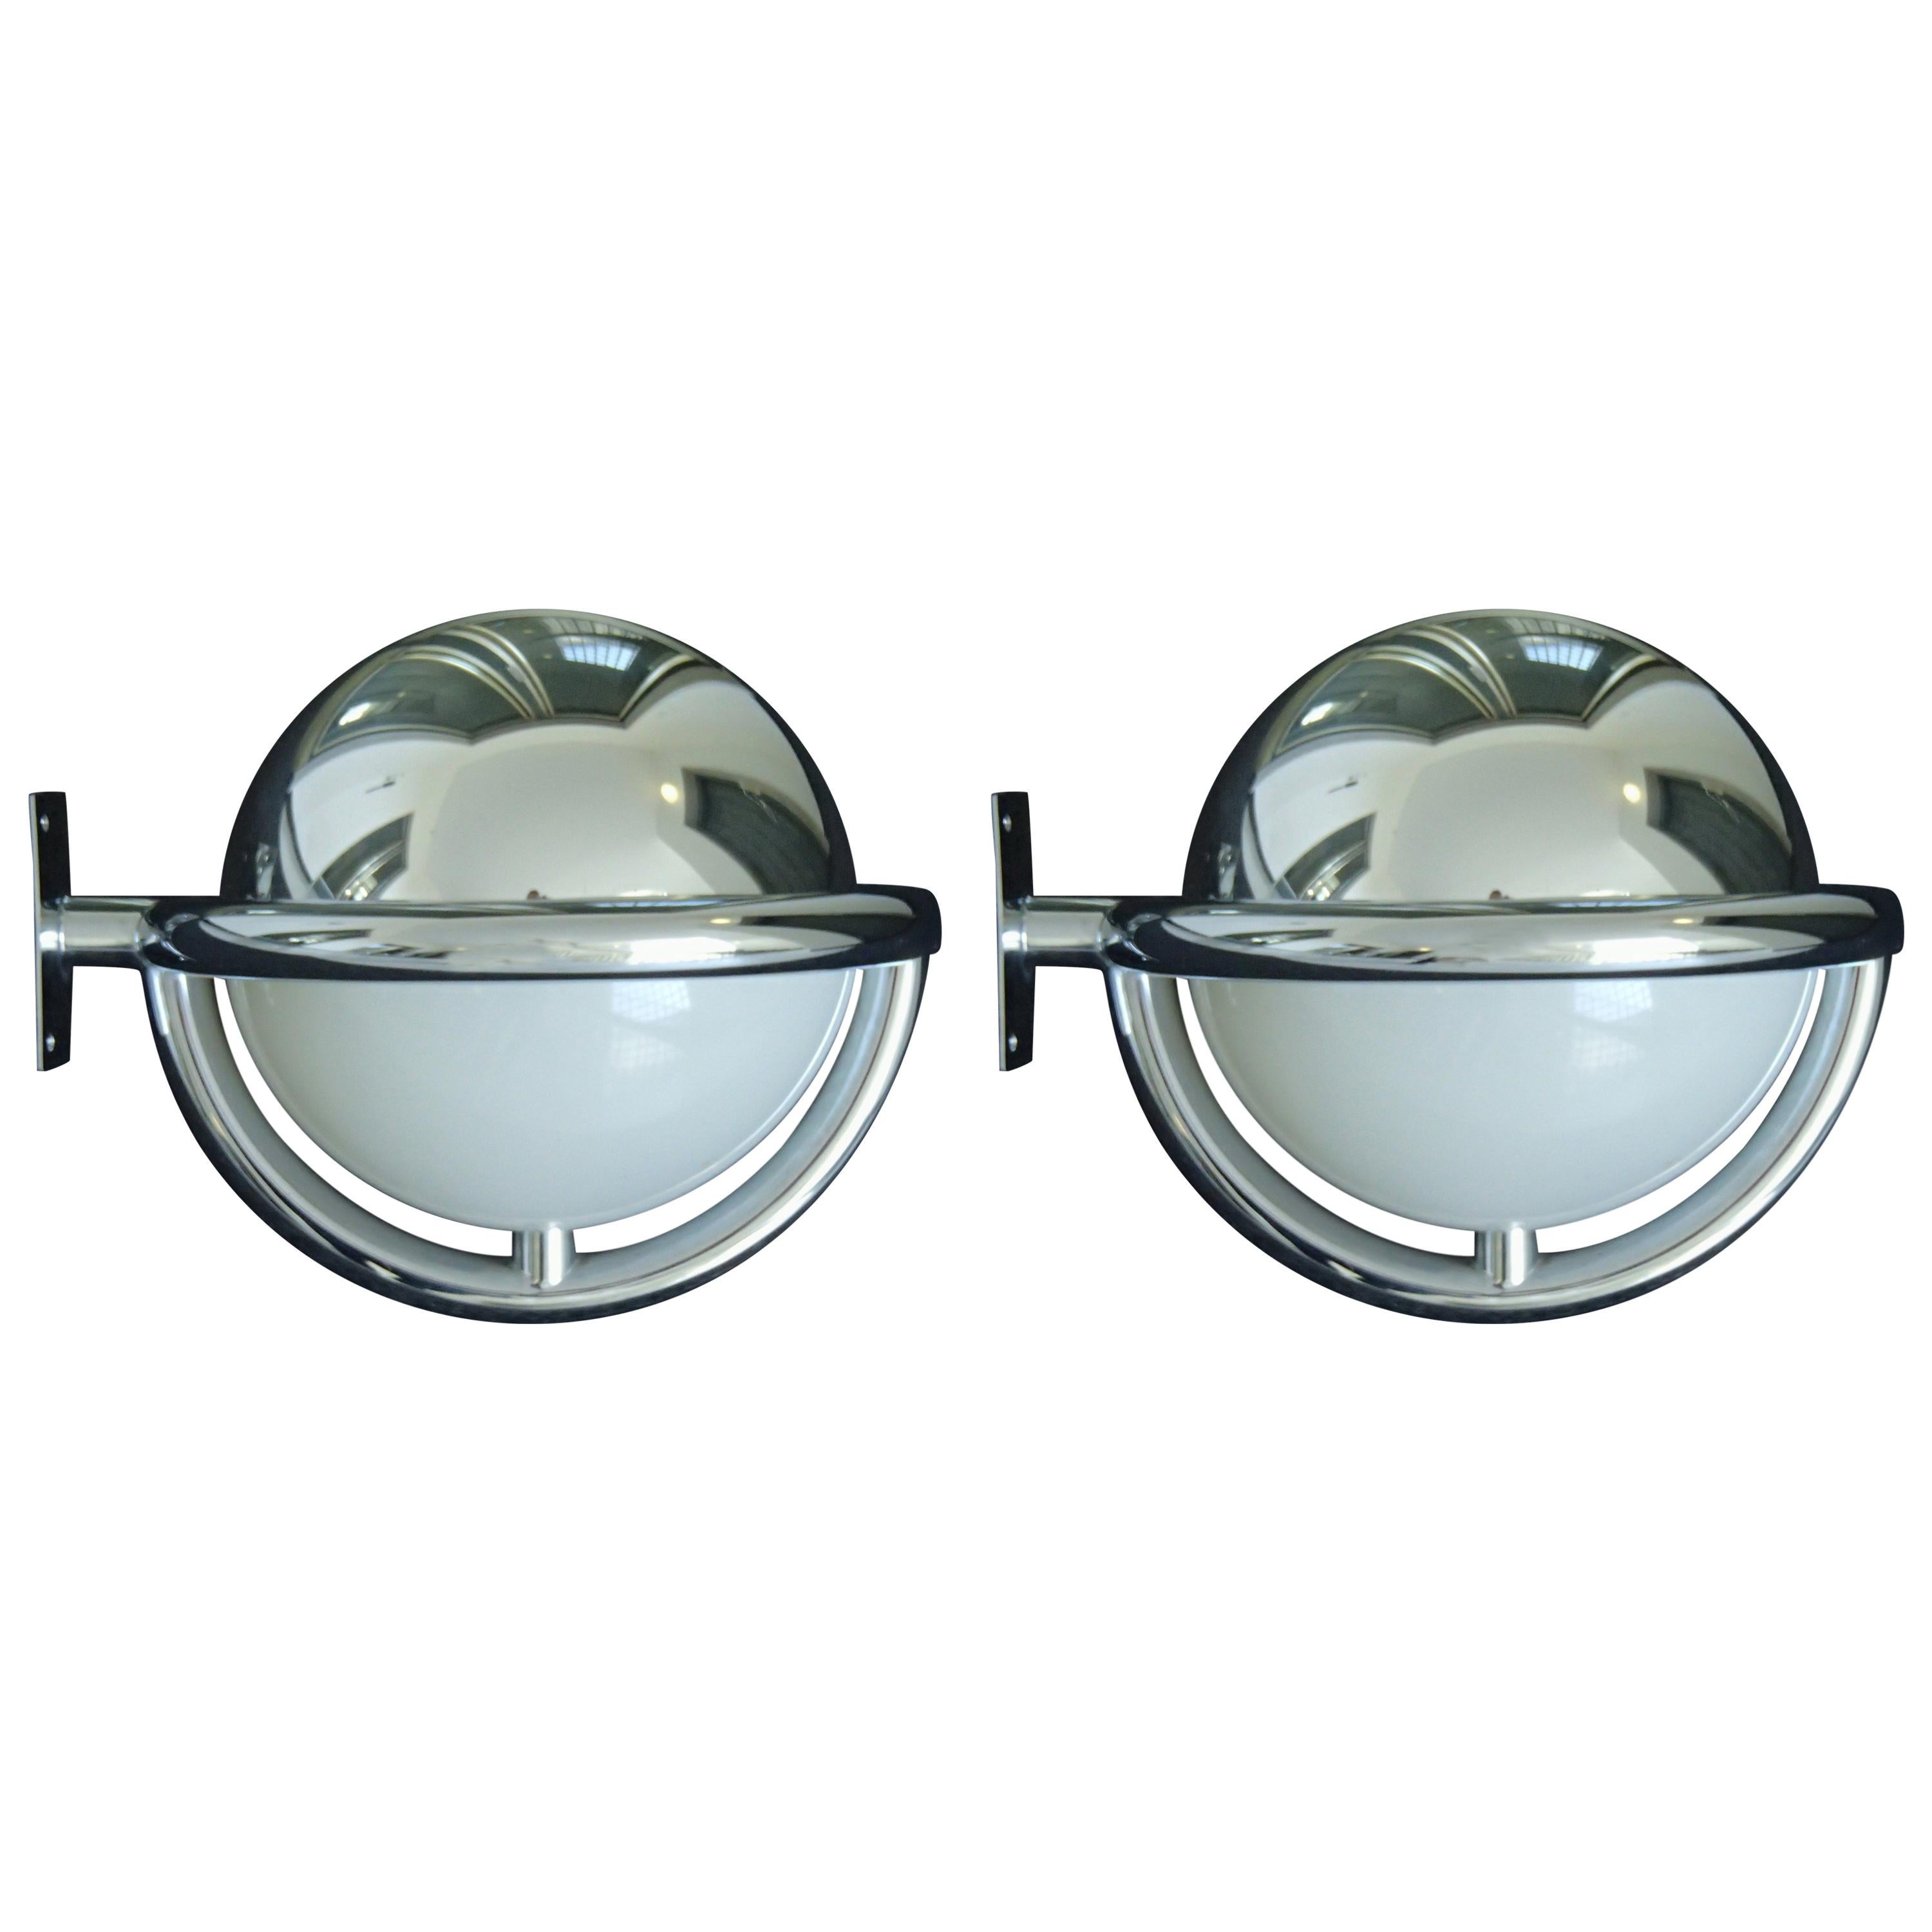 Pair of Art Deco Bauhaus Chrome and Plexiglass Huge Round Wall Lights  Scones For Sale at 1stDibs